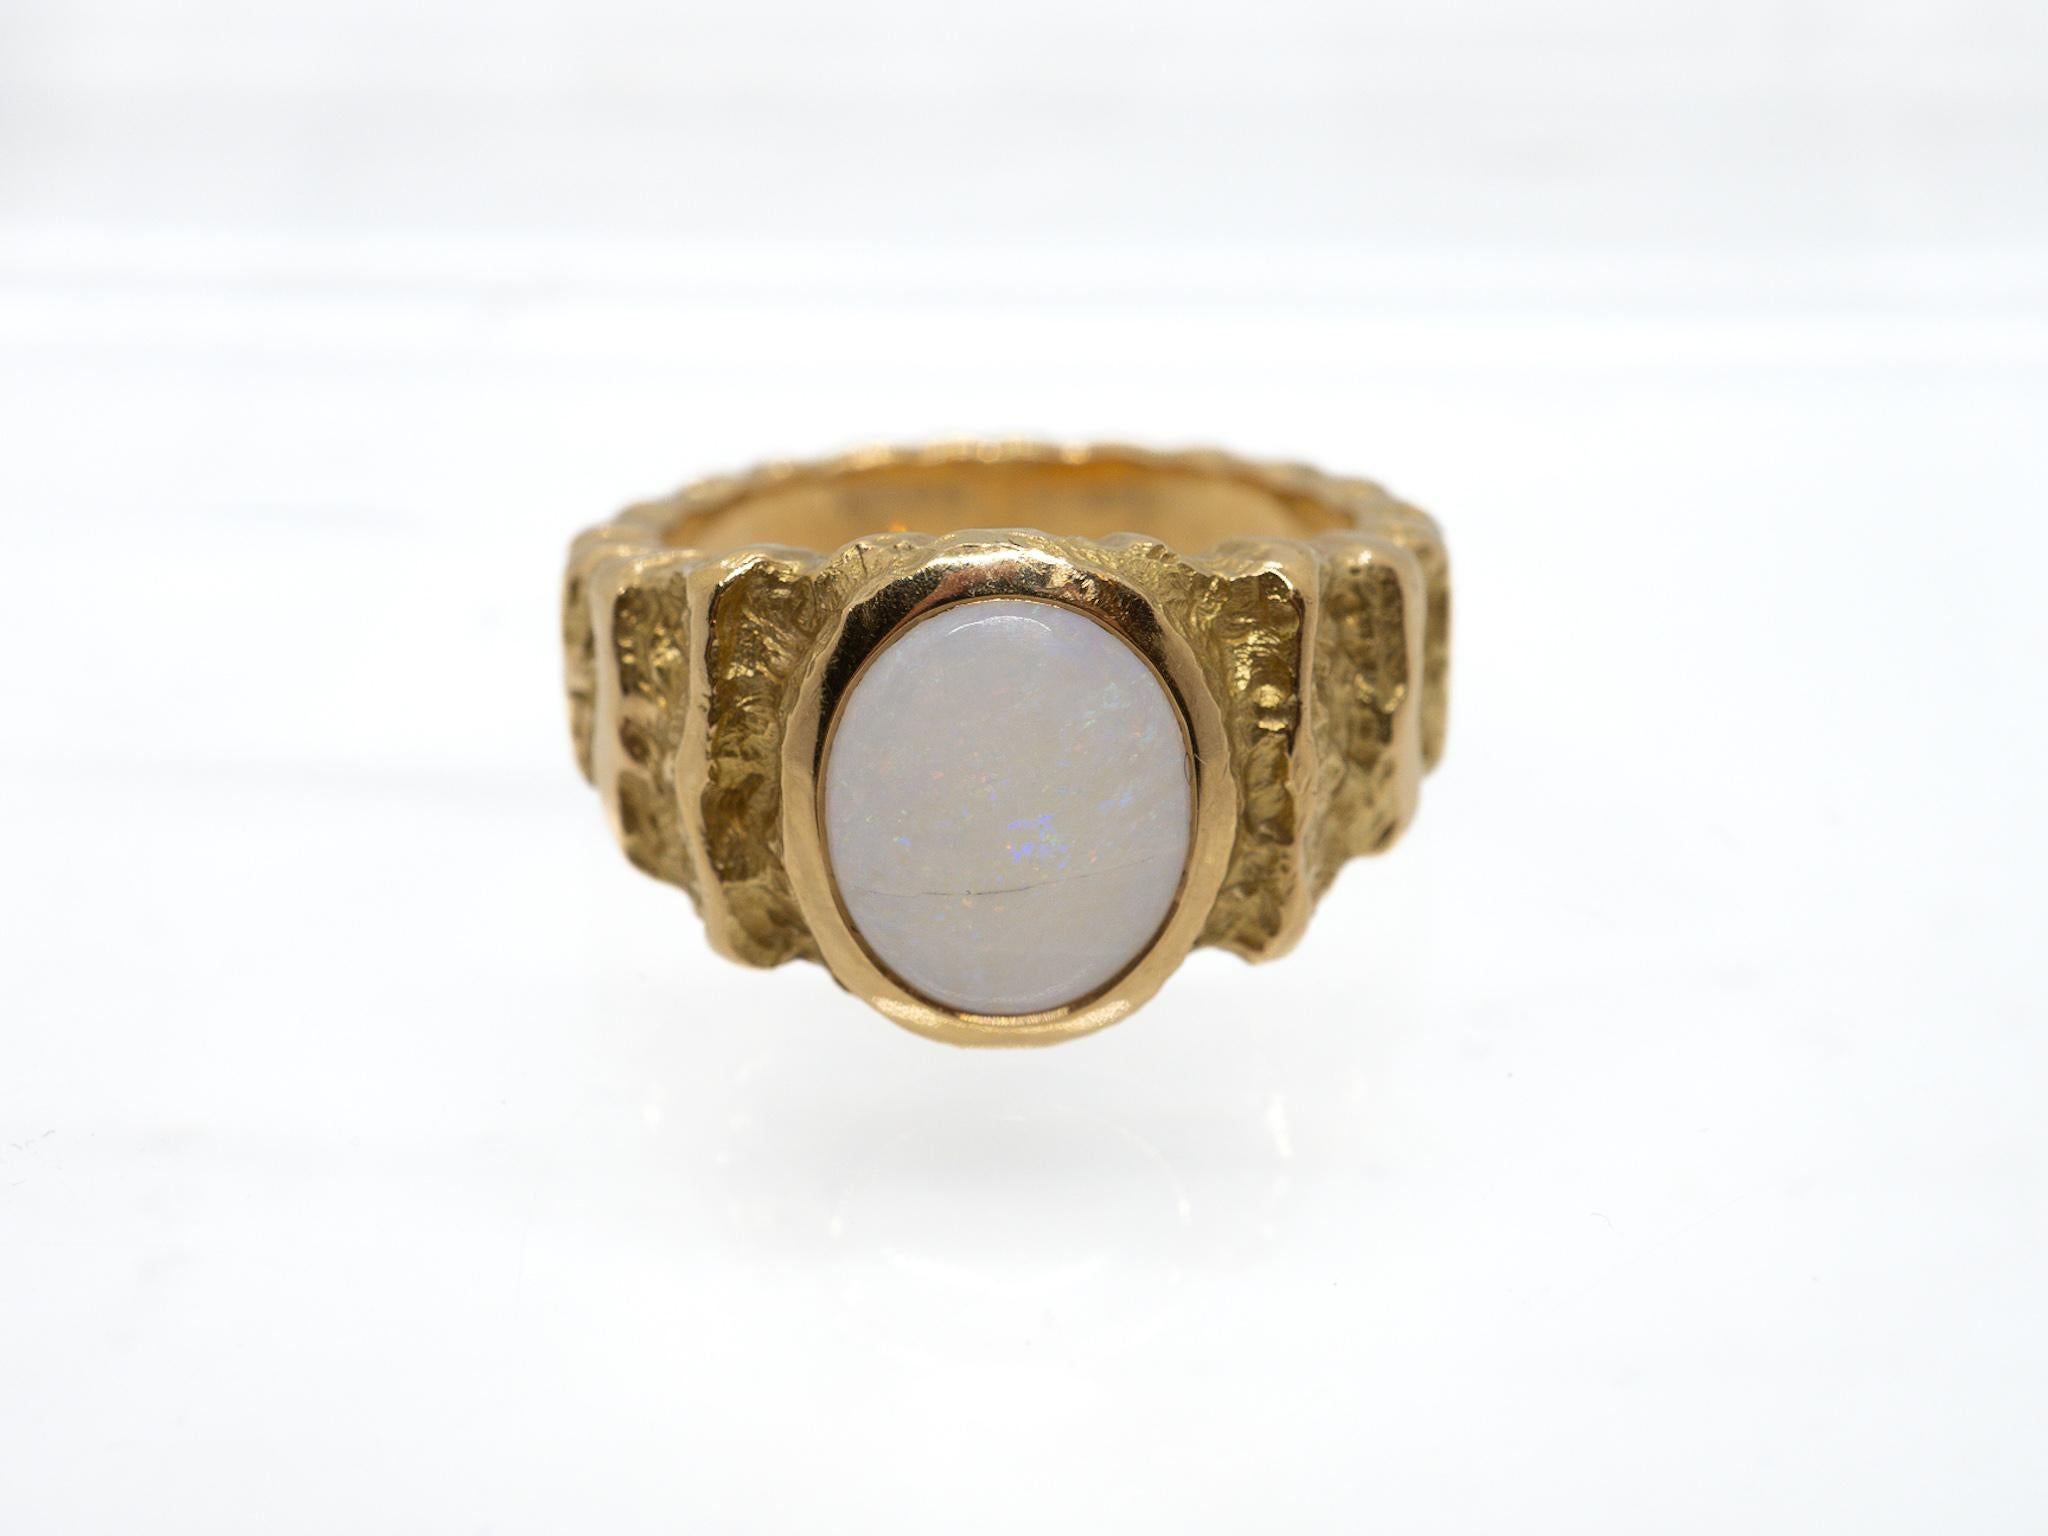 Welcome to our exquisite e-shop, where luxury and style come together to present to you an extraordinary masterpiece: the Massive 18K Gold Ring adorned with a captivating natural Opal gemstone. This unisex ring, designed to transcend traditional